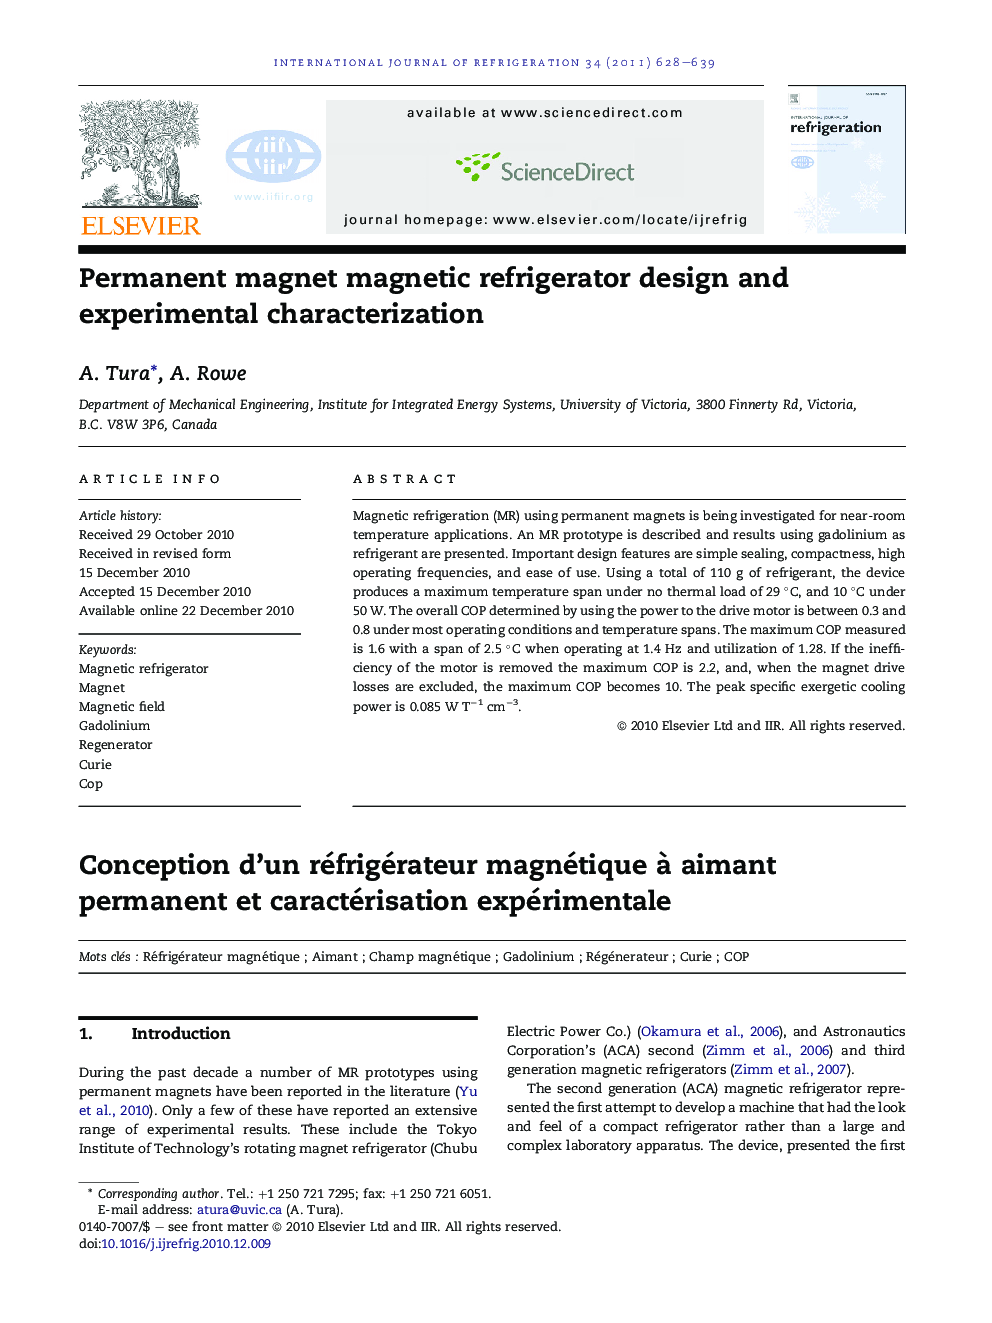 Permanent magnet magnetic refrigerator design and experimental characterization